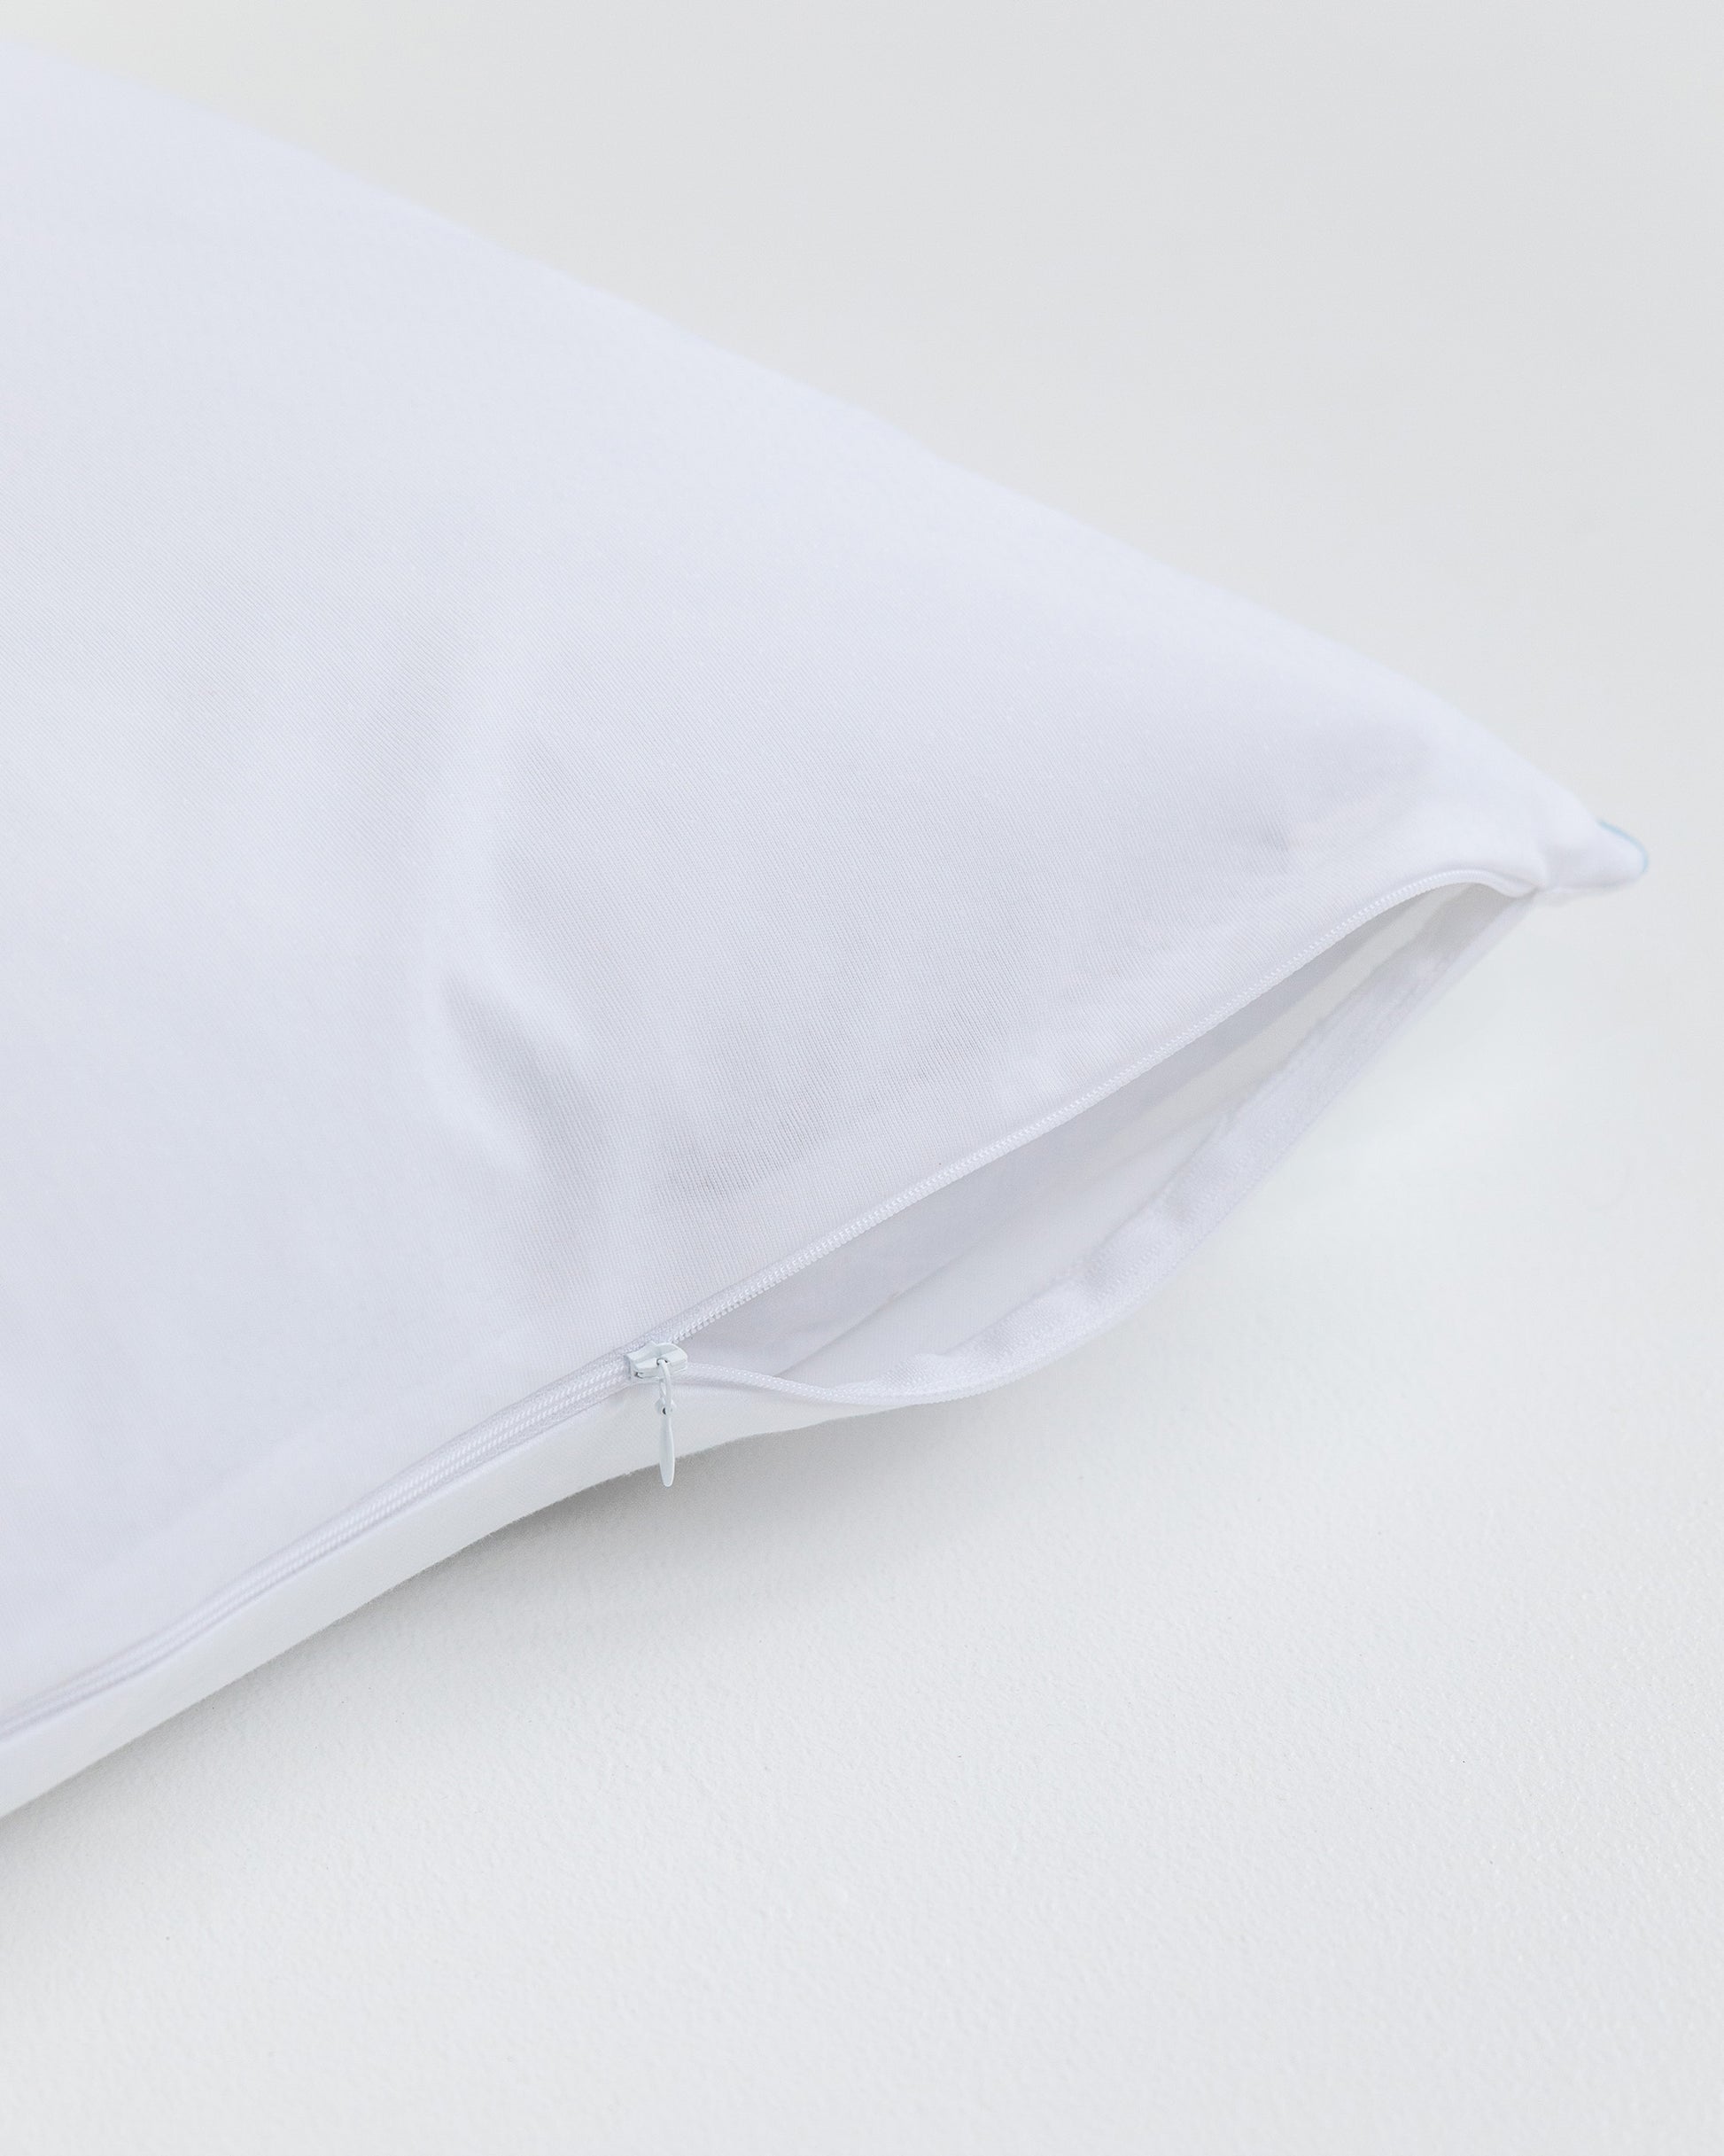 Down Pillow Protector - sneakstylesanctums